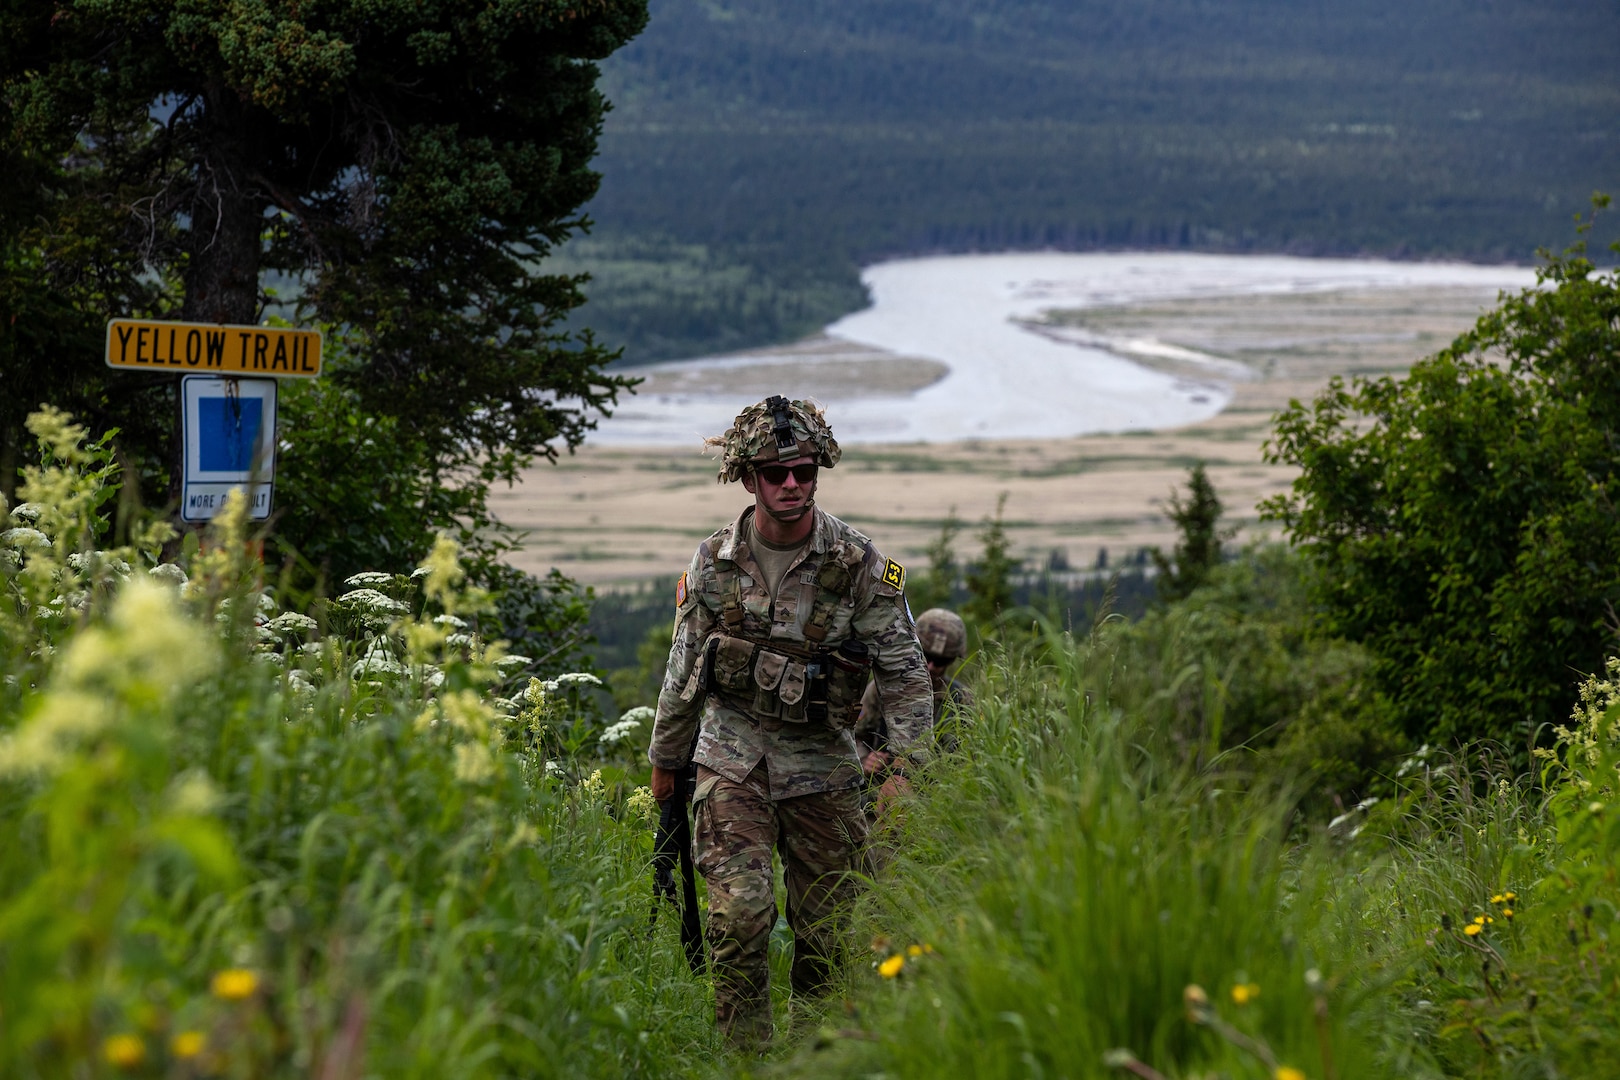 U.S. Army Spc. Jackson Jacobs, an artillery forward observer assigned to the Tennessee Army National Guard, representing Region III, rucks Hippie Trail during the 2023 Army National Guard Best Warrior Competition at Black Rapids Training Area, Alaska on July 10, 2023.